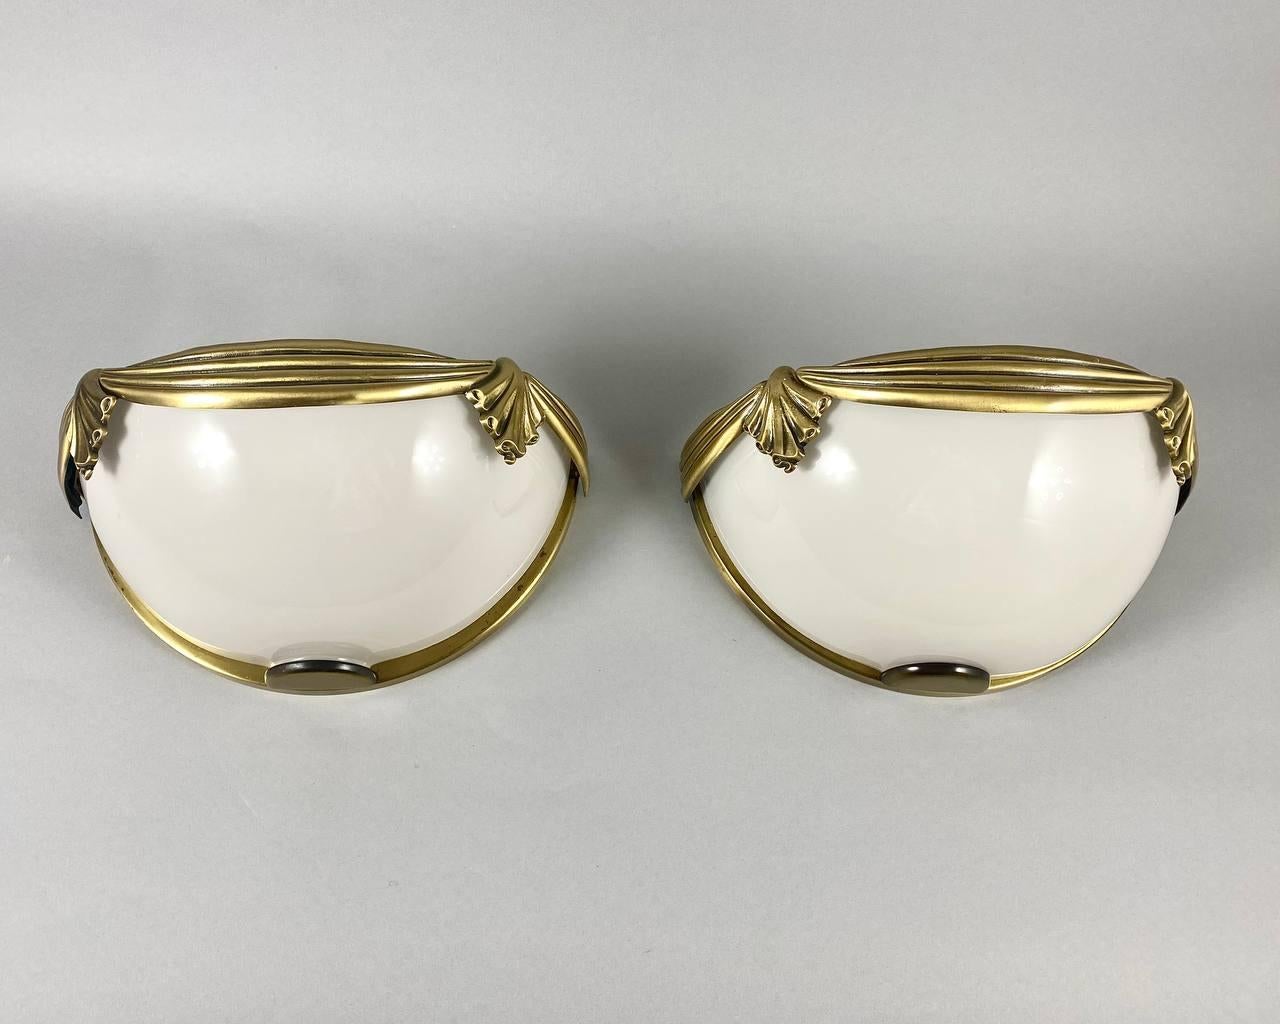 Spanish Vintage Paired Wall Sconces by Cuenca Iluminacion S.A, Spain For Sale